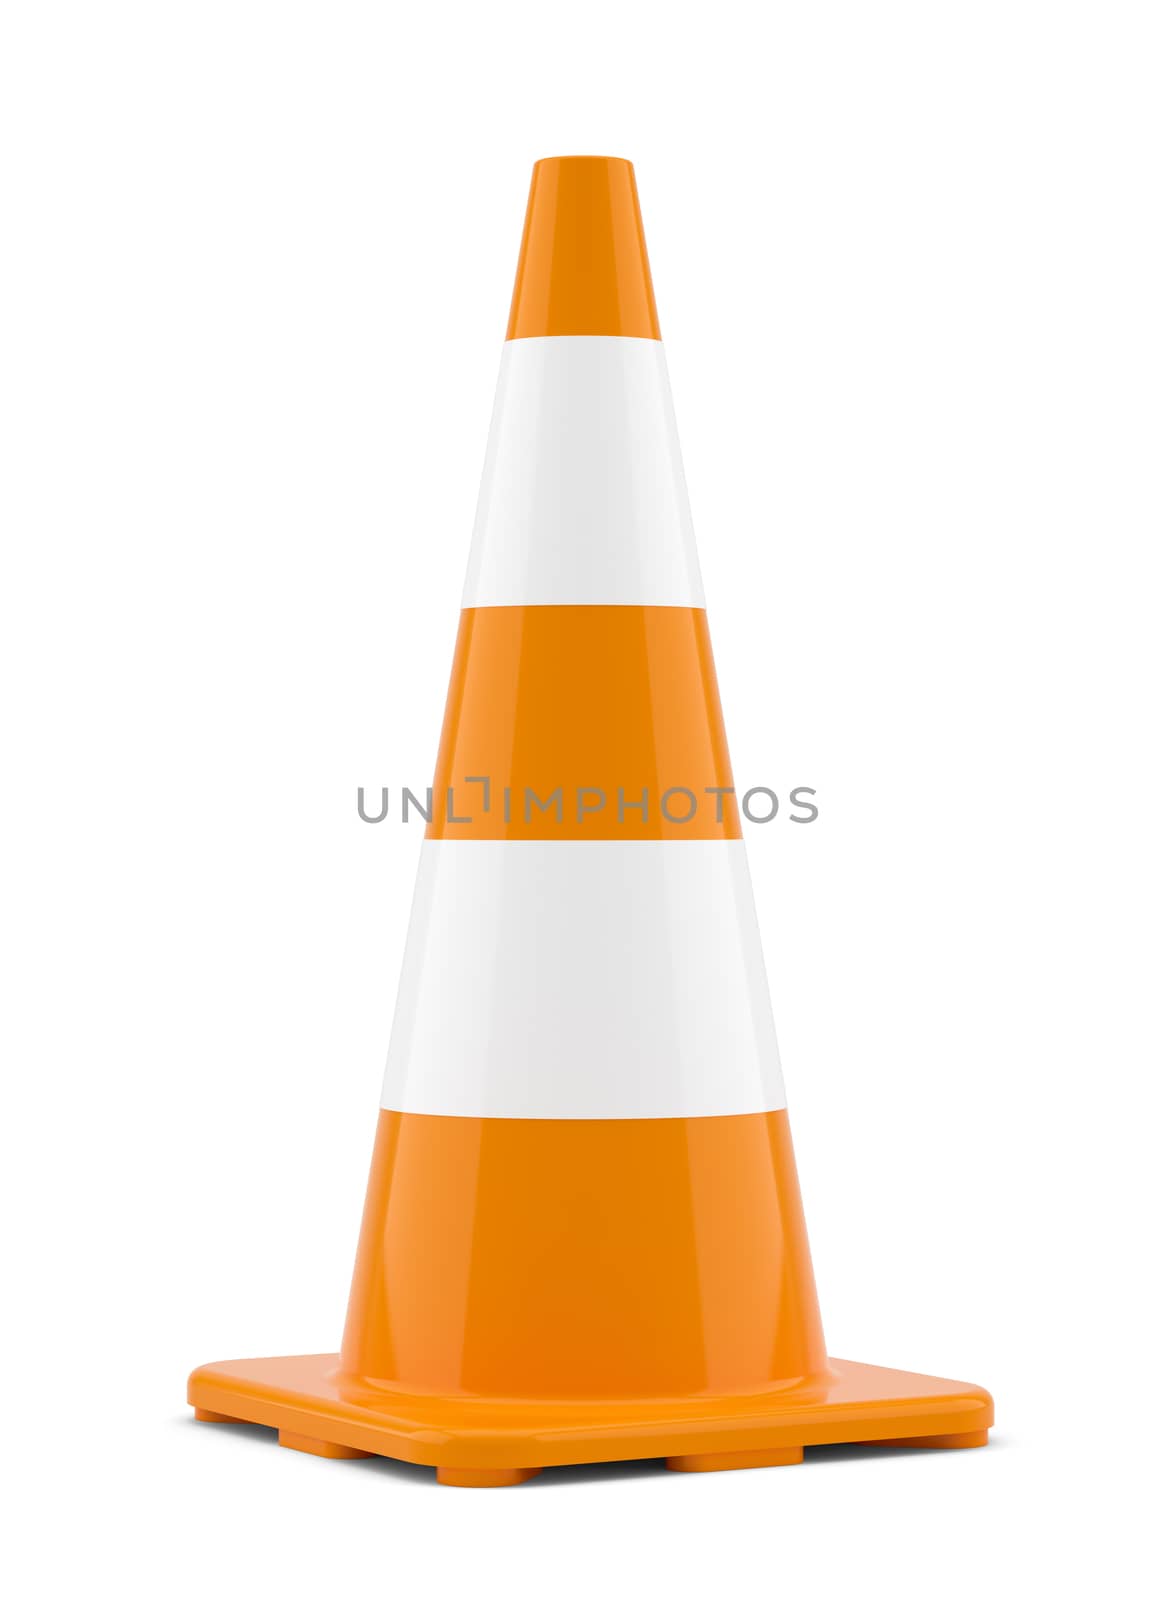 3D illustration of traffic cone. Isoalted on white